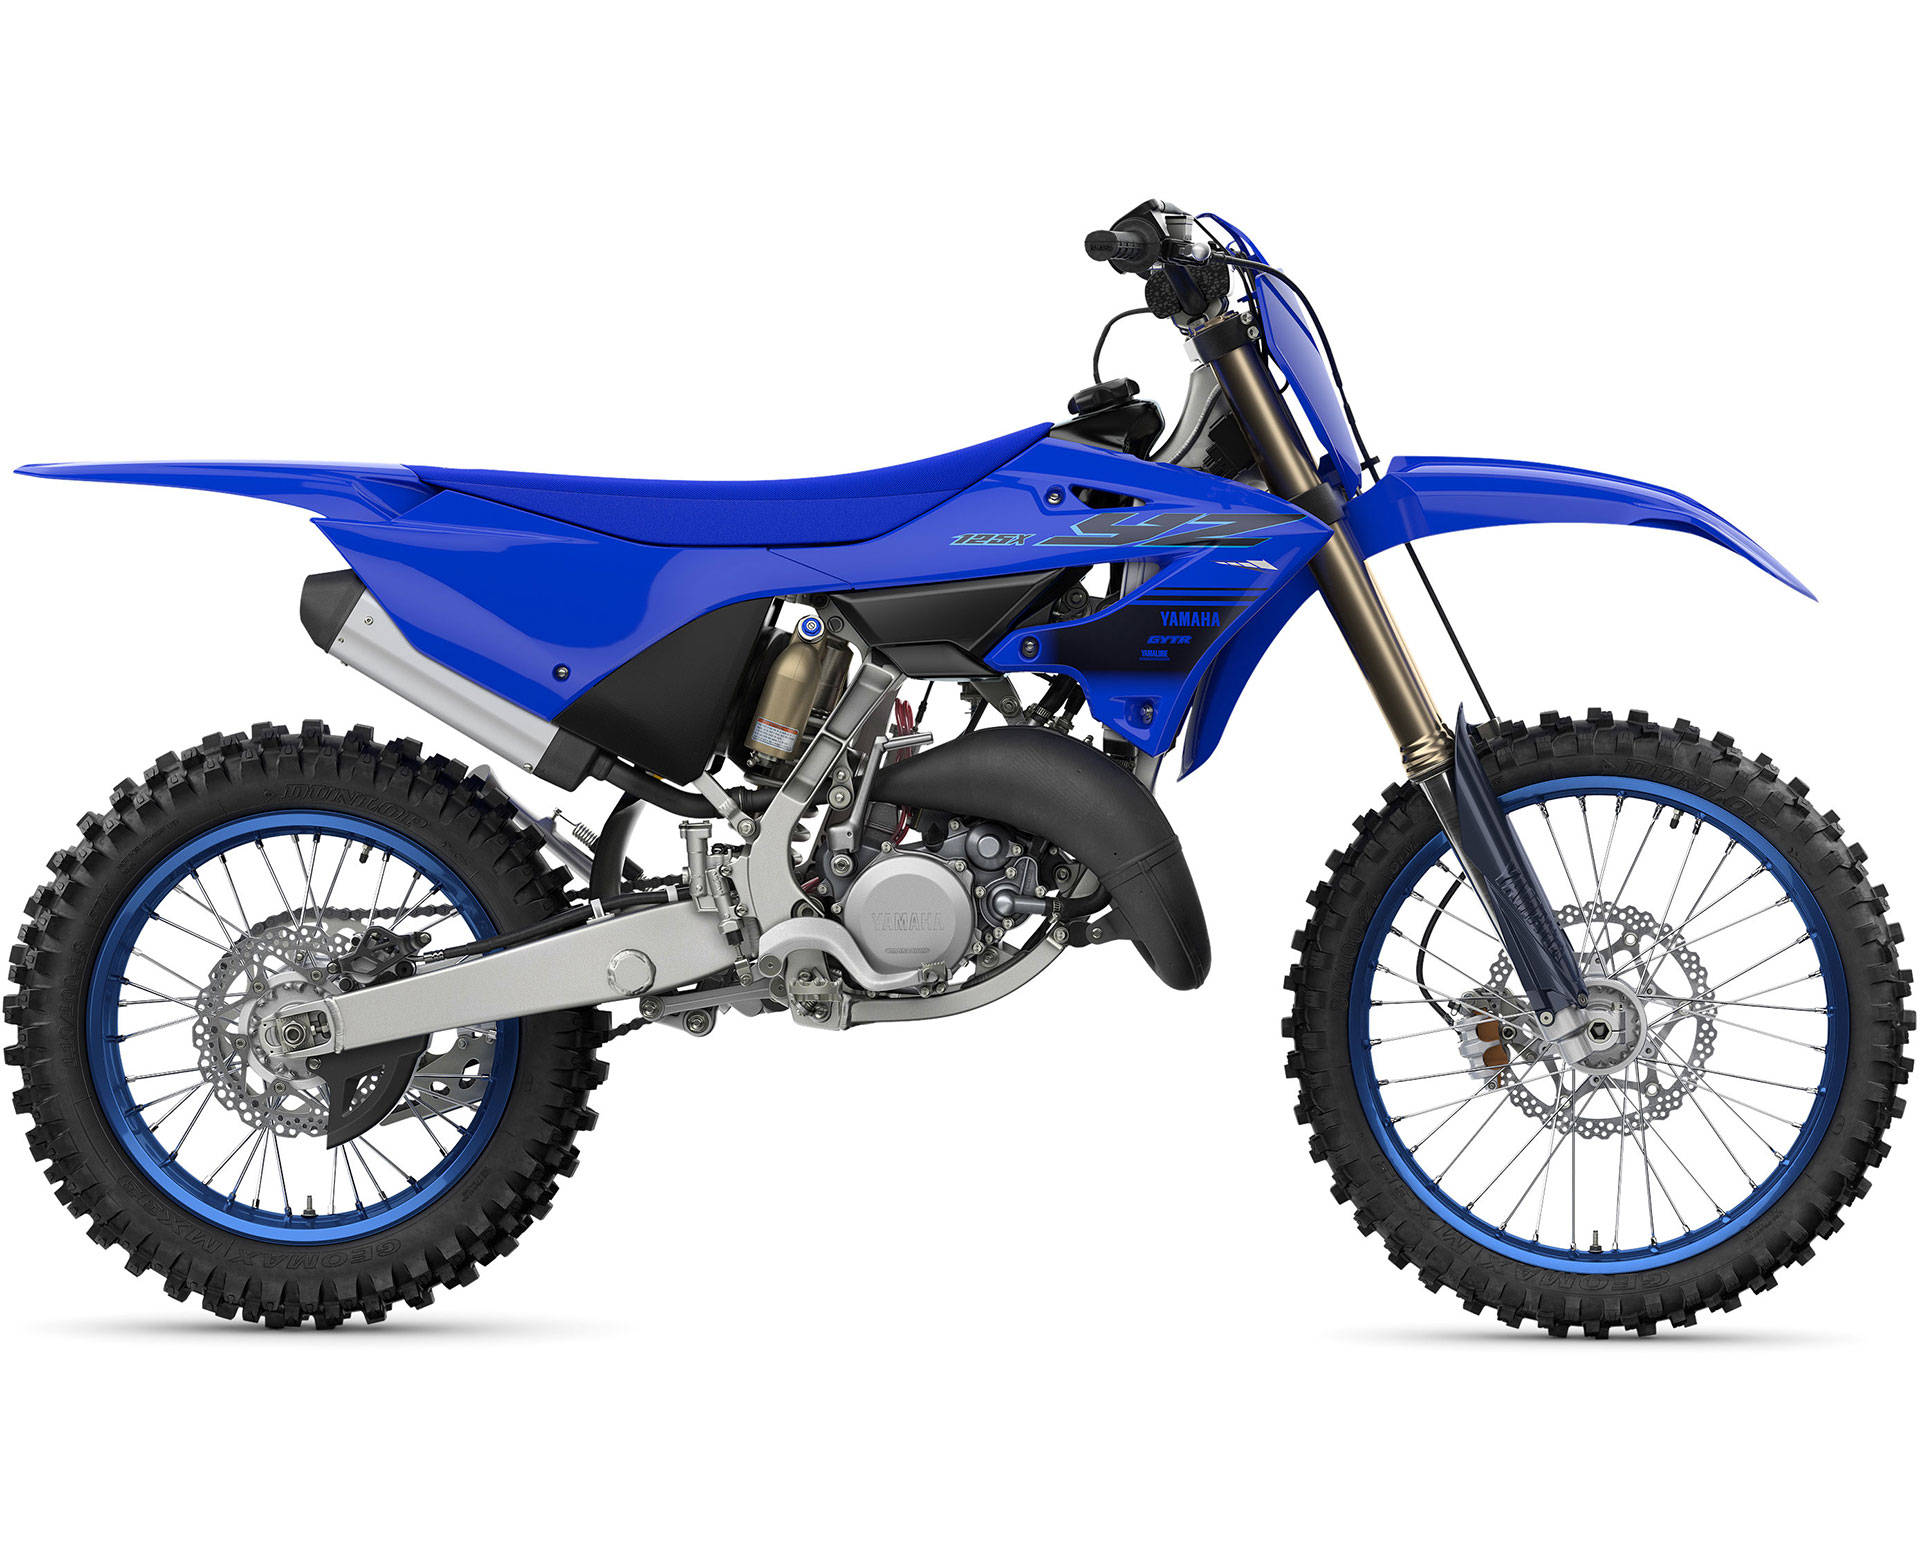 Thumbnail of your customized YZ125X 2024